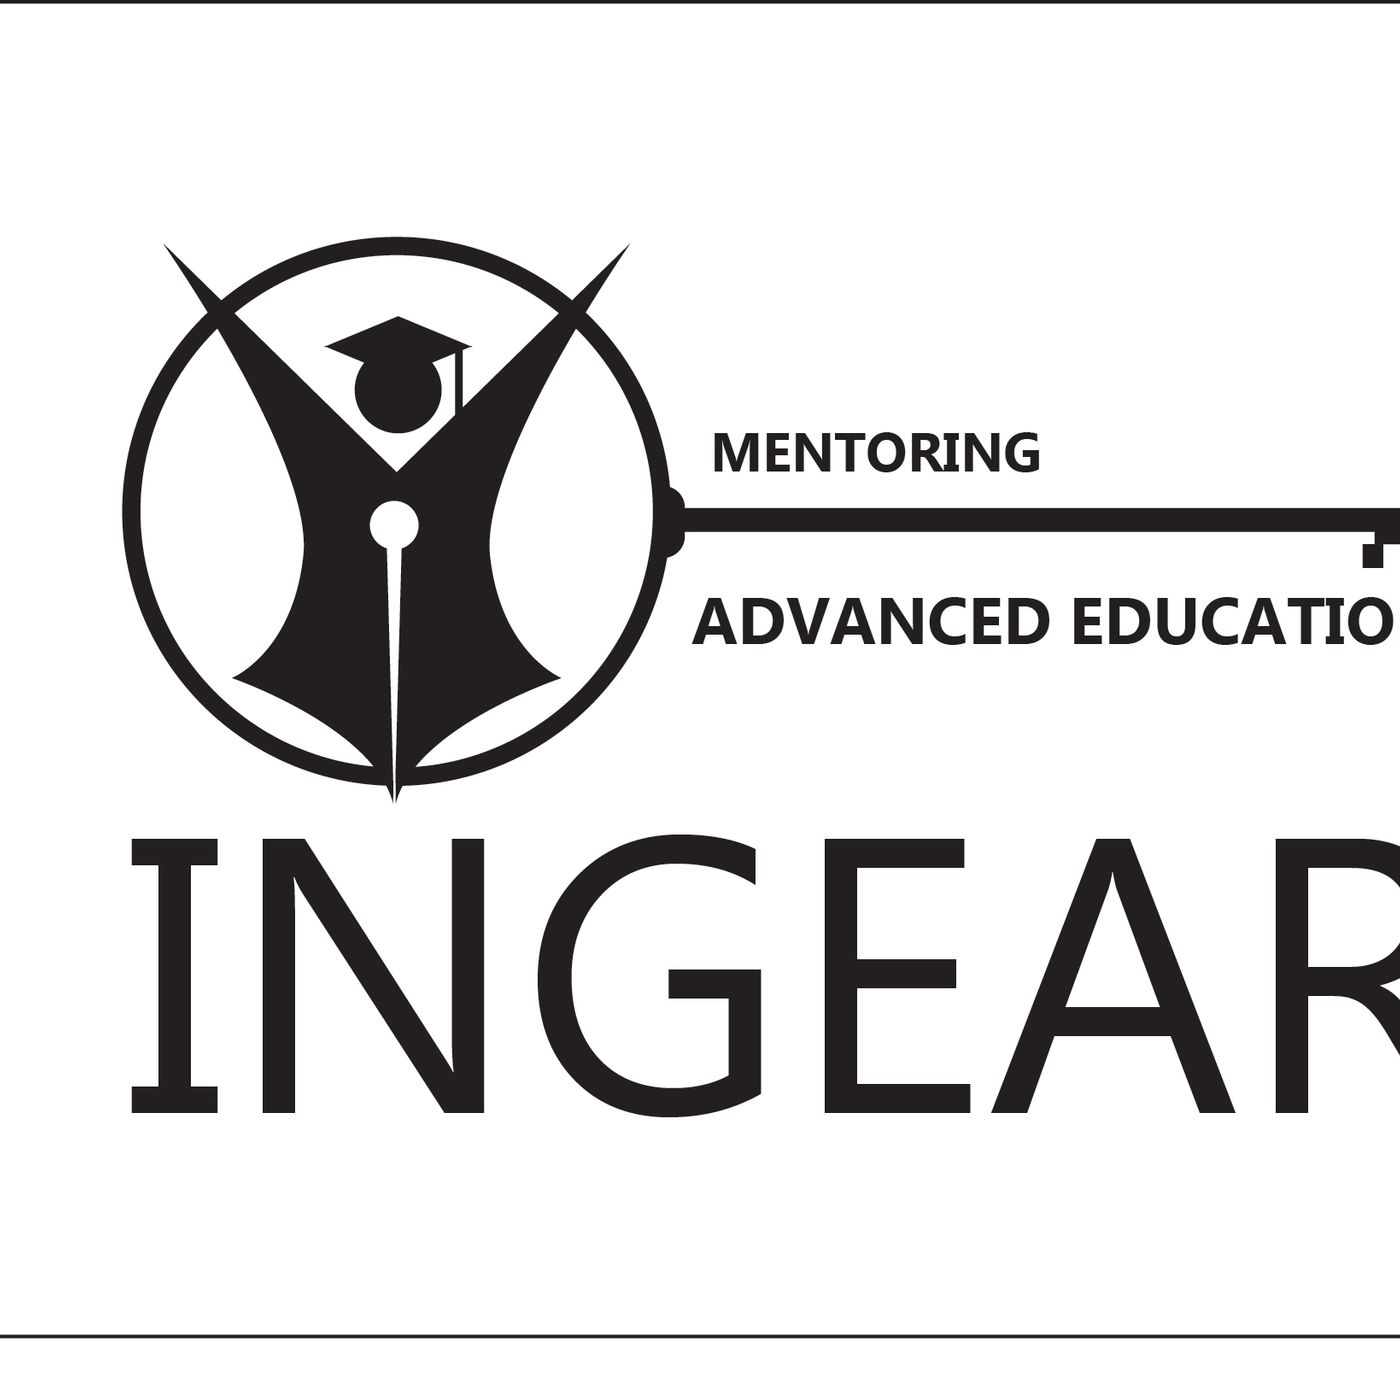 Team Ingear is about Mentoring Advanced Education